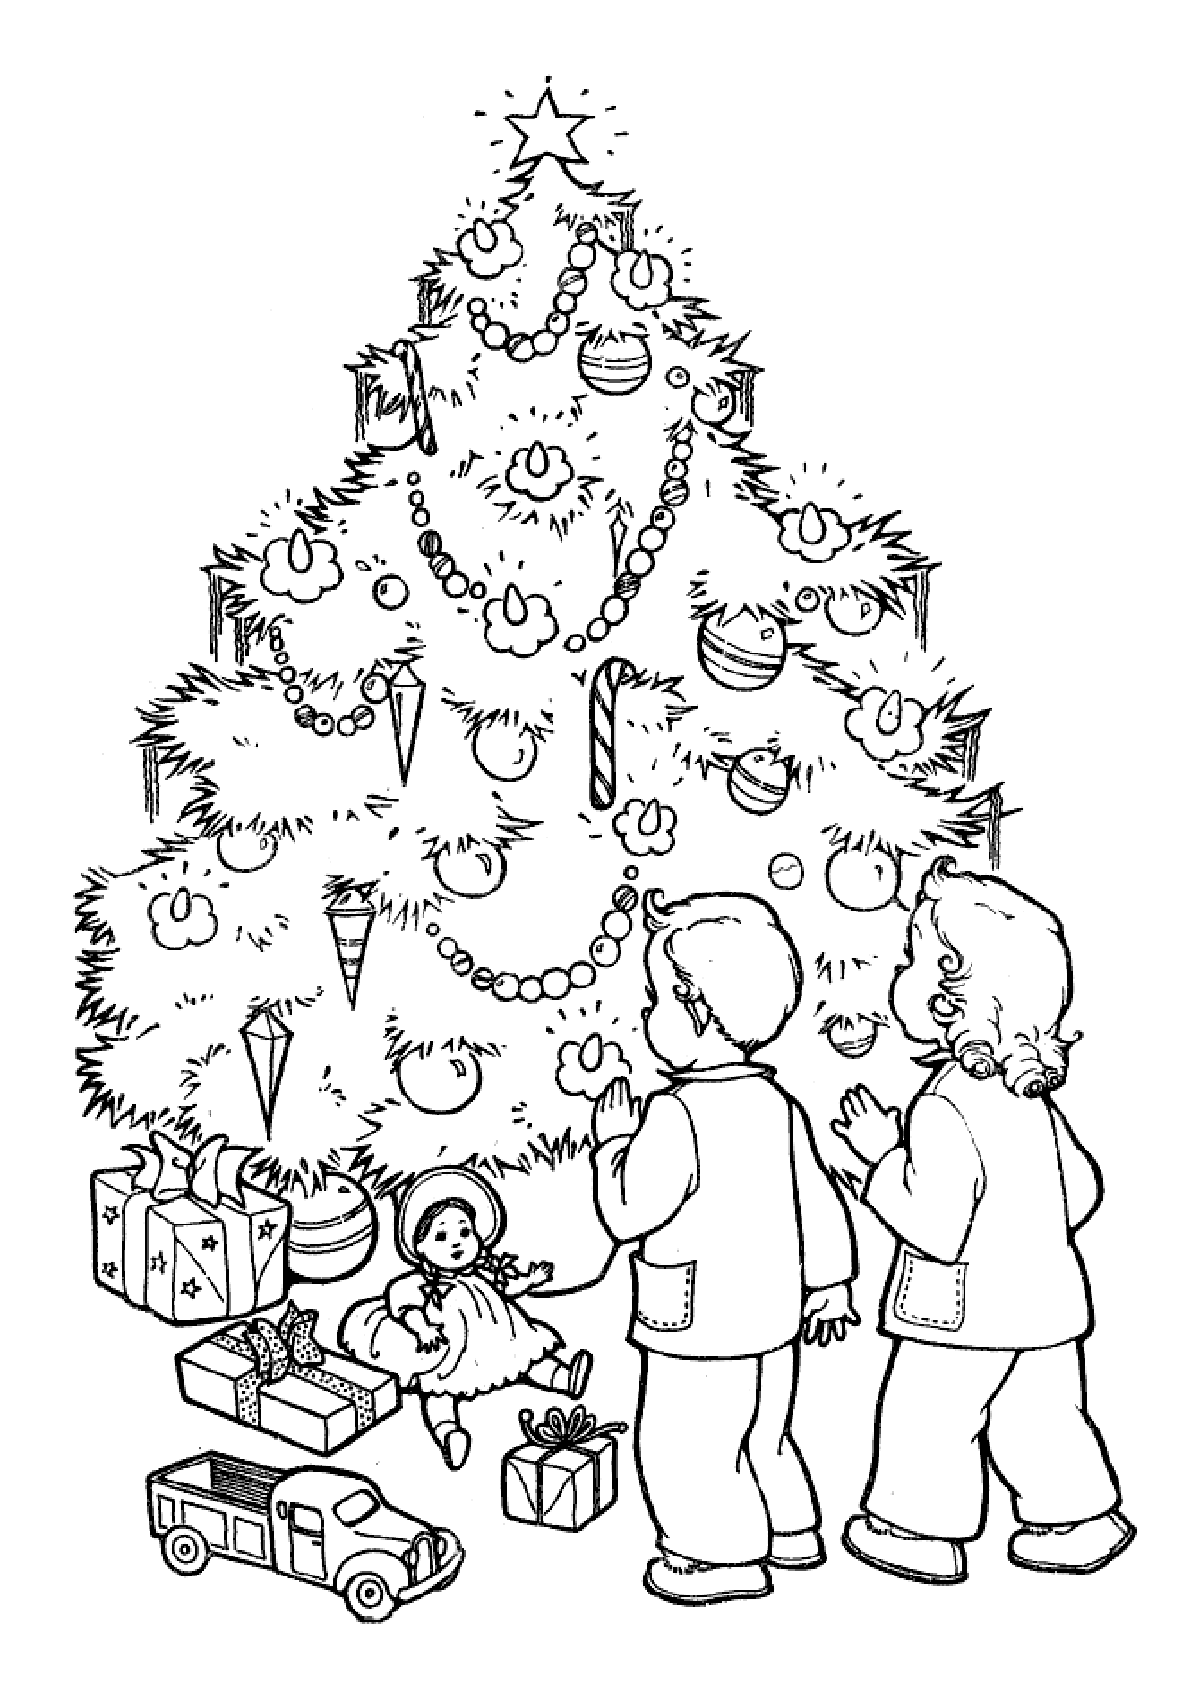 Christmas Tree Coloring Pages for childrens printable for free